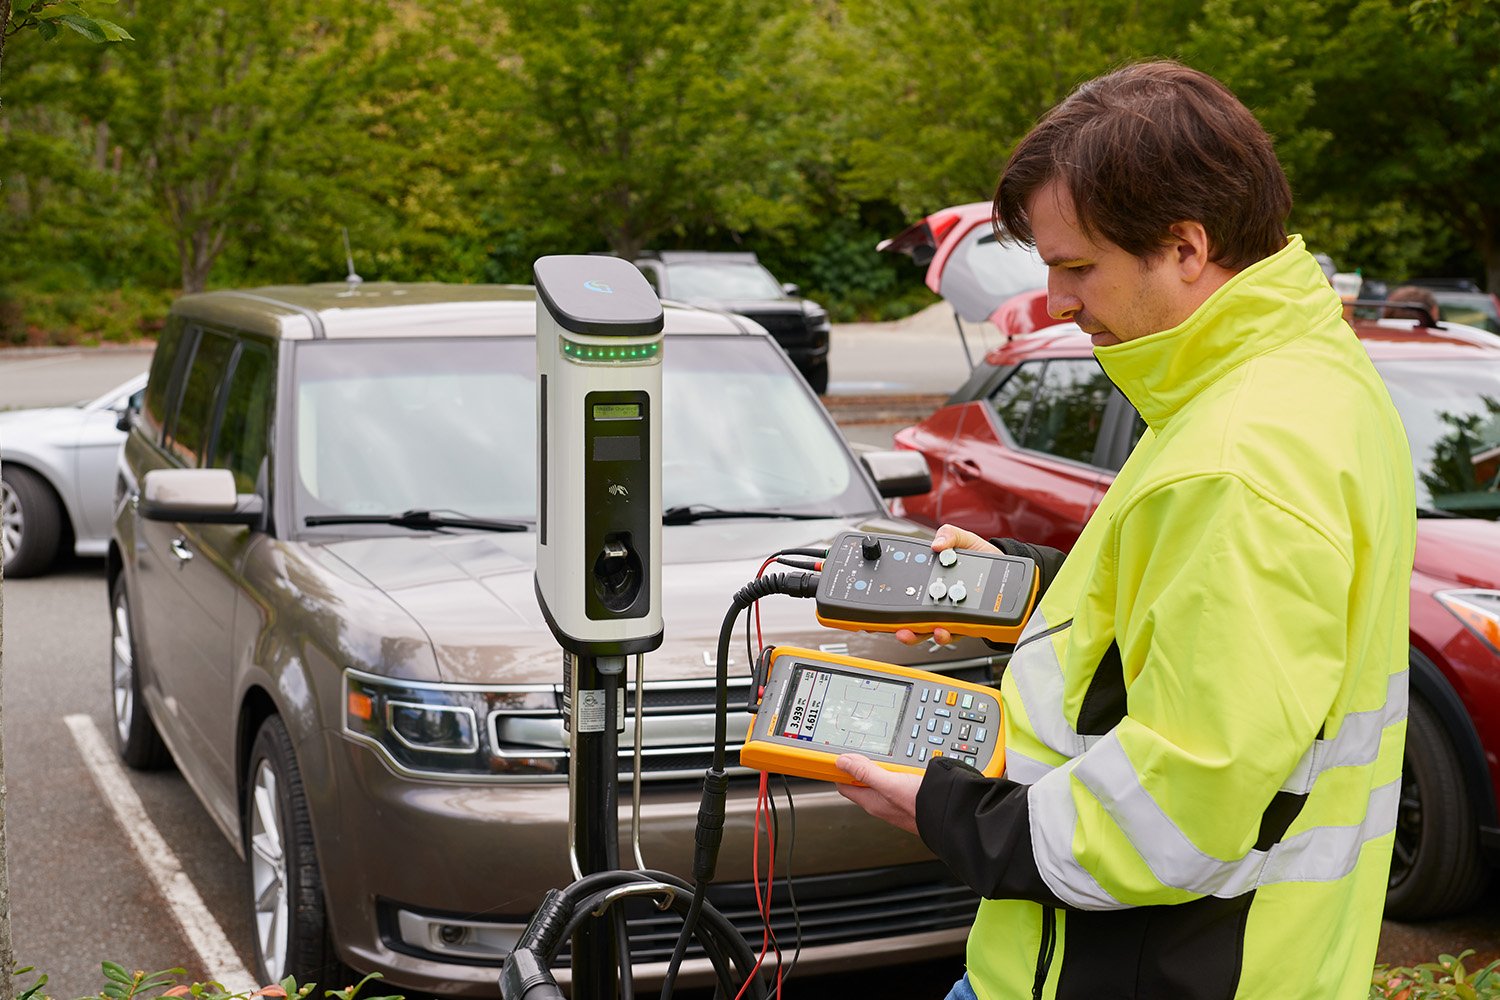 Man in optic yellow jacket testing an EV charging station with an FEV100 and a Fluke scopemeter